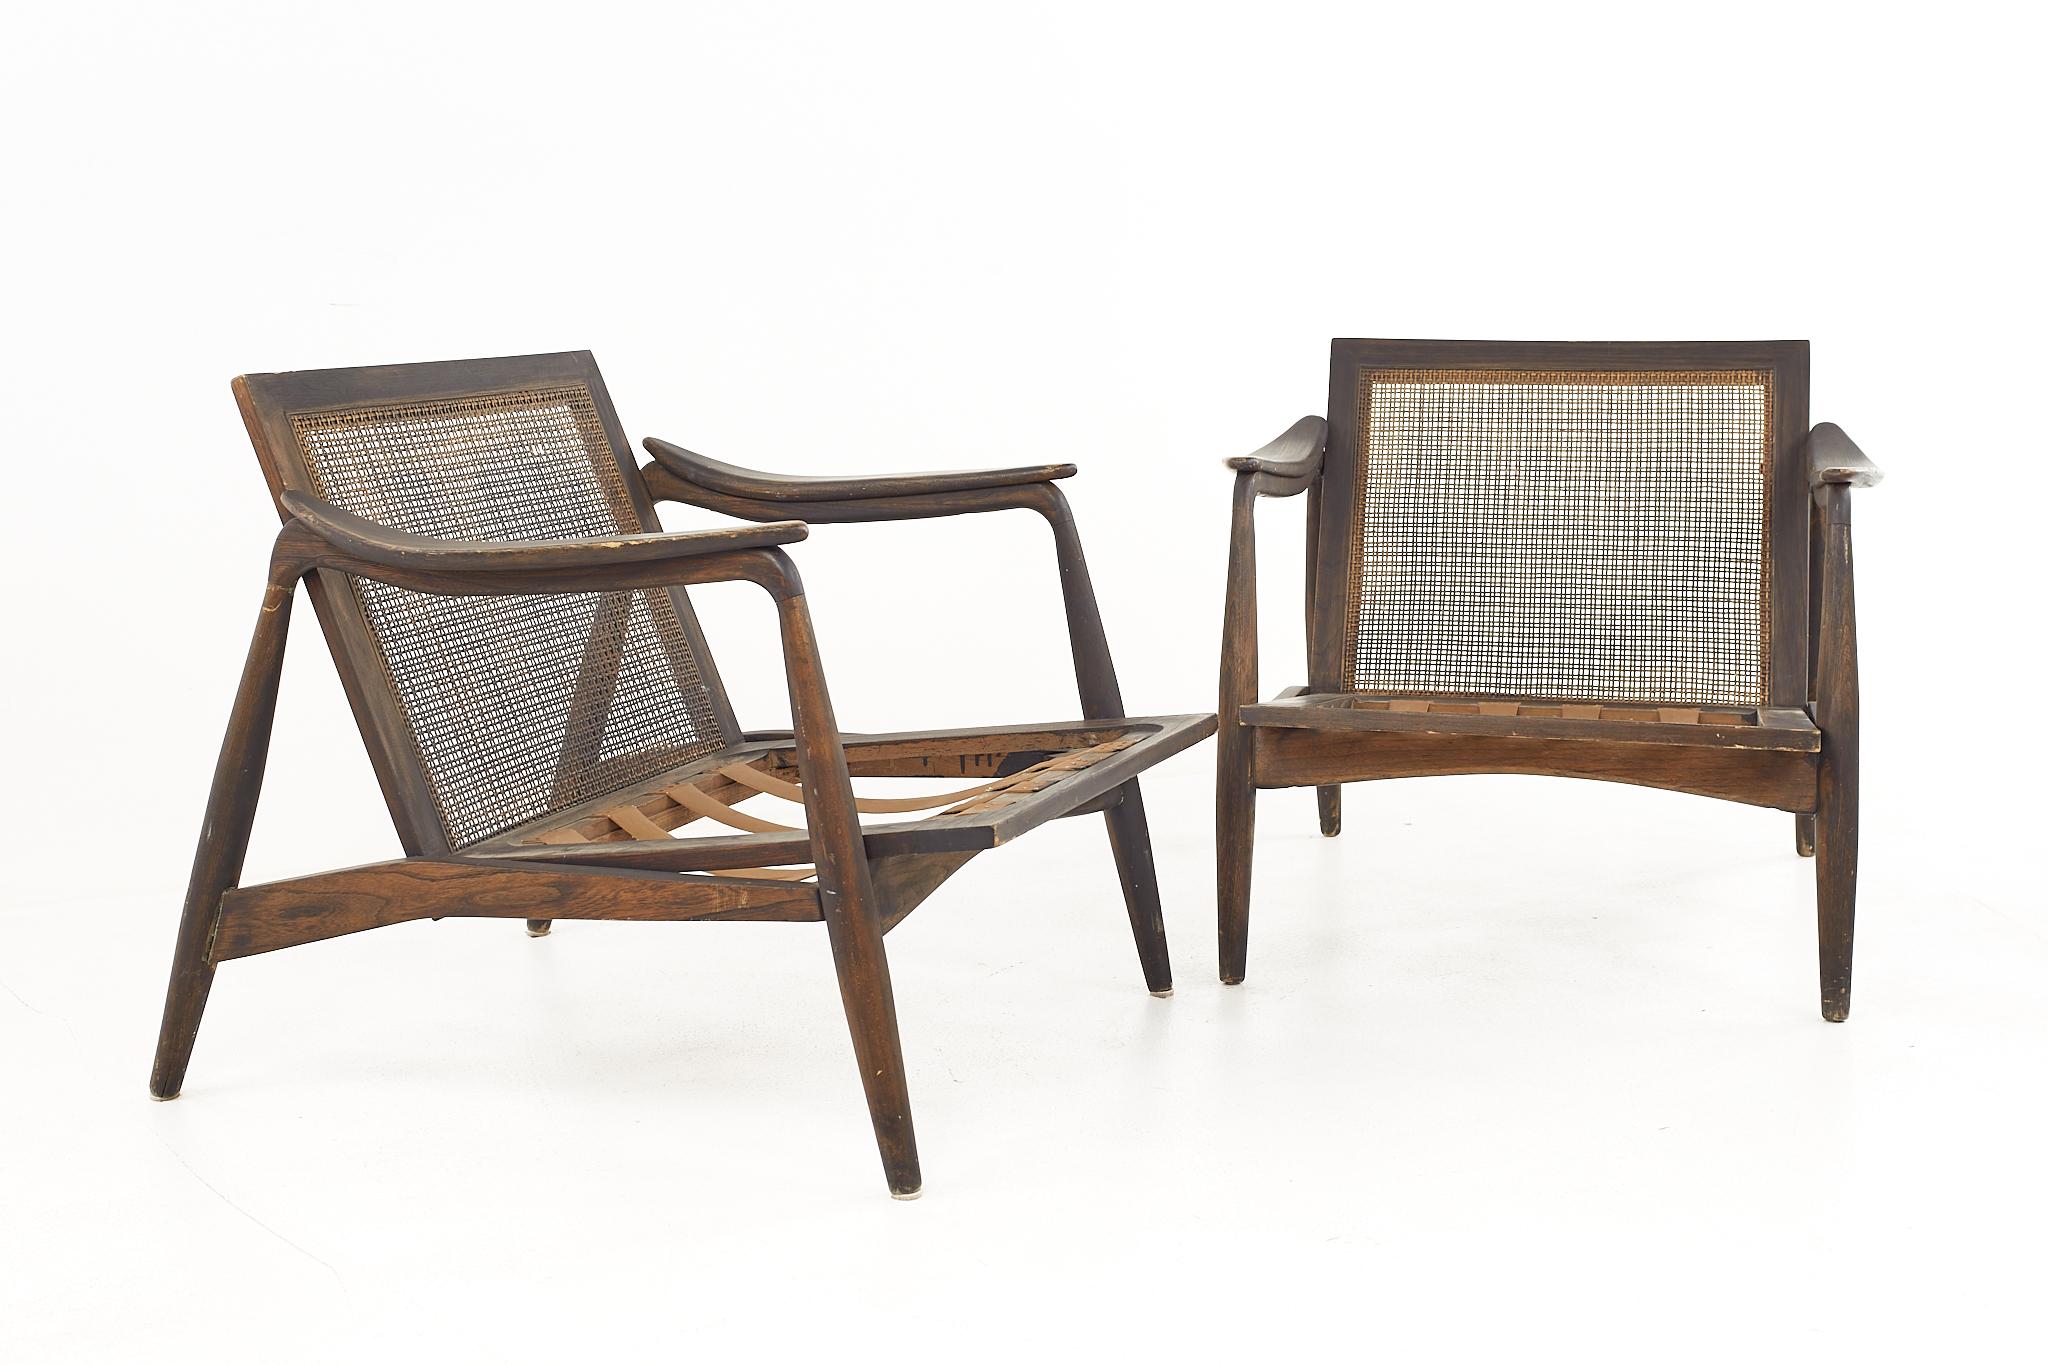 Lawrence Peabody for Richardson Nemschoff Mid Century Ebonized Walnut and Cane Lounge Chairs - A Pair

Each chair measures: 29.5 wide x 35 deep x 27 high, with a seat height of 17 inches and arm height of 21.5 inches 

All pieces of furniture